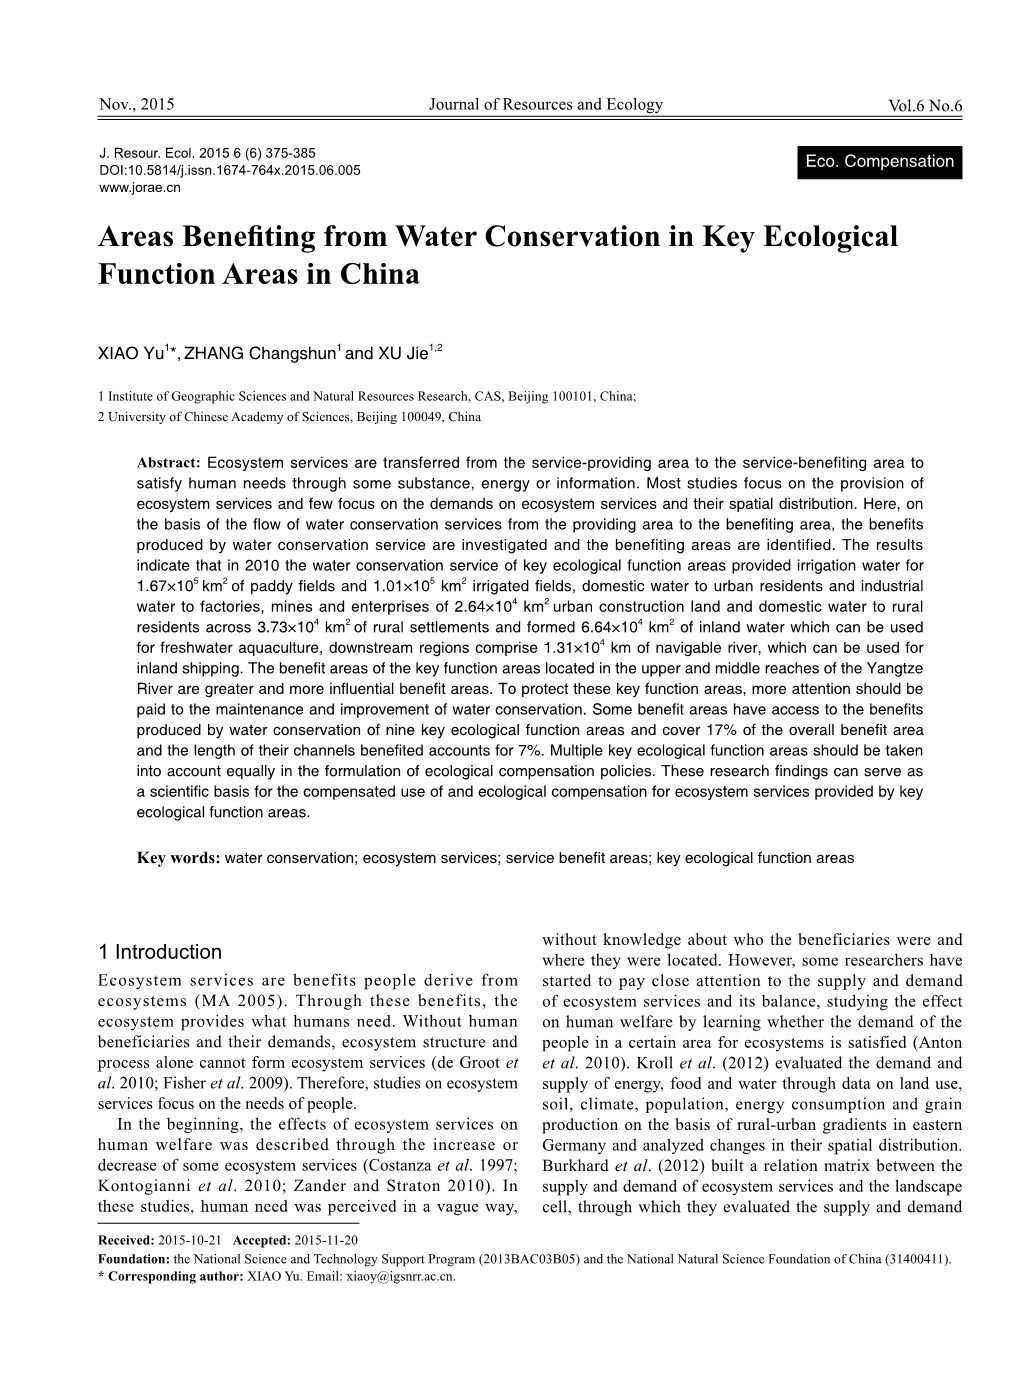 Areas Benefiting from Water Conservation in Key Ecological Function Areas in China